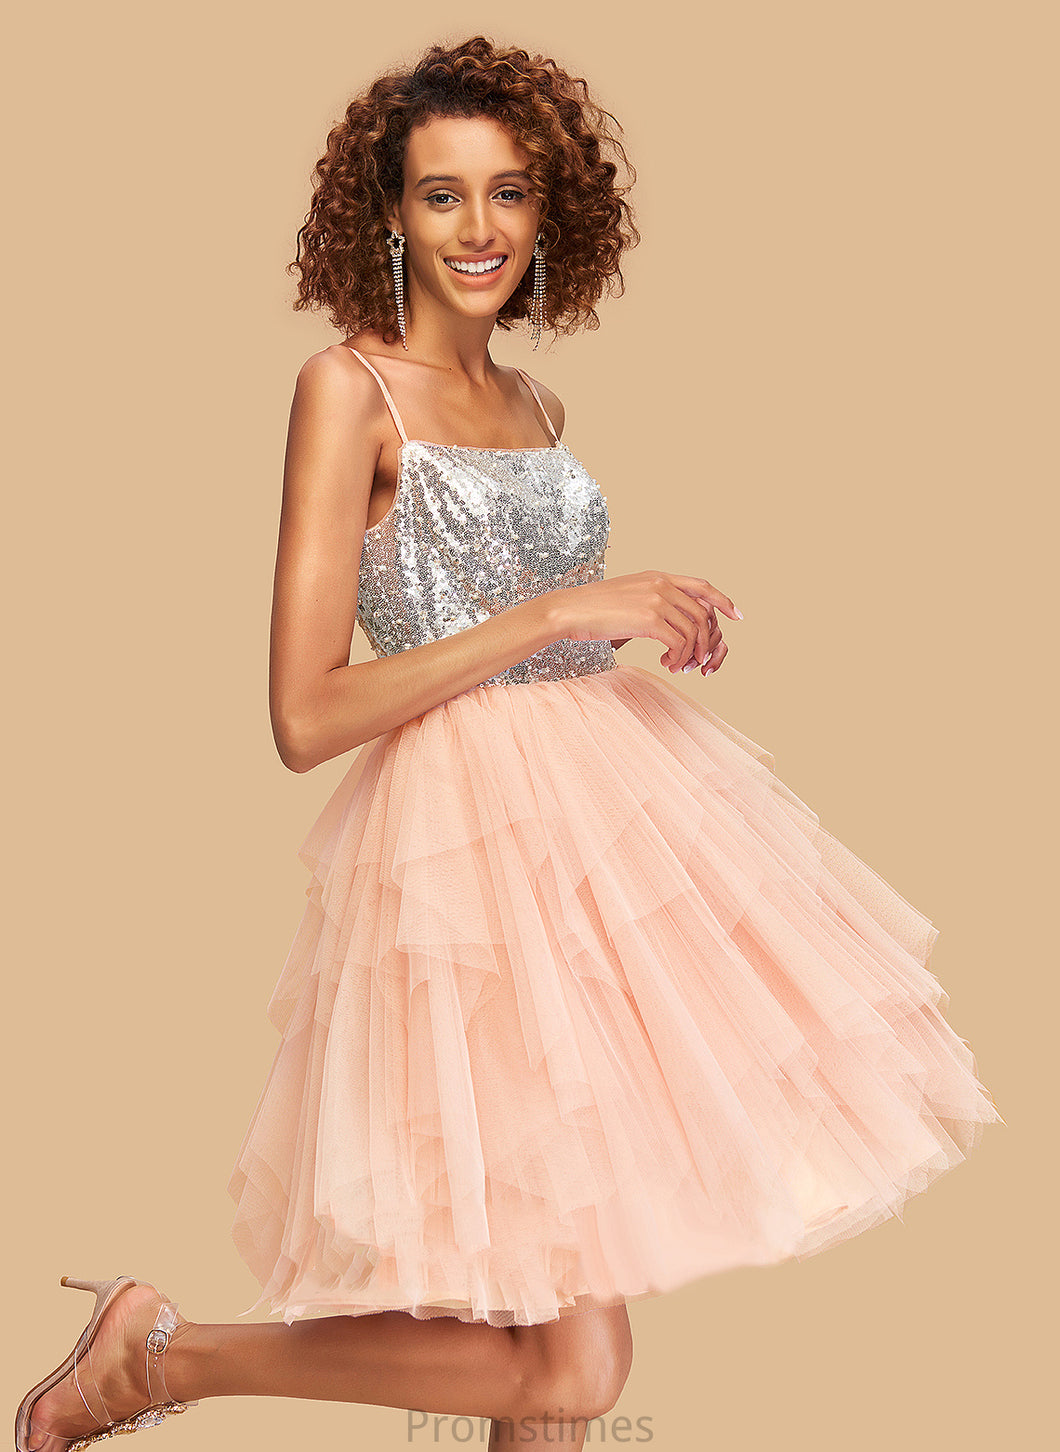 Neckline Amira Sequins Homecoming Dress Knee-Length With Tulle A-Line Square Homecoming Dresses